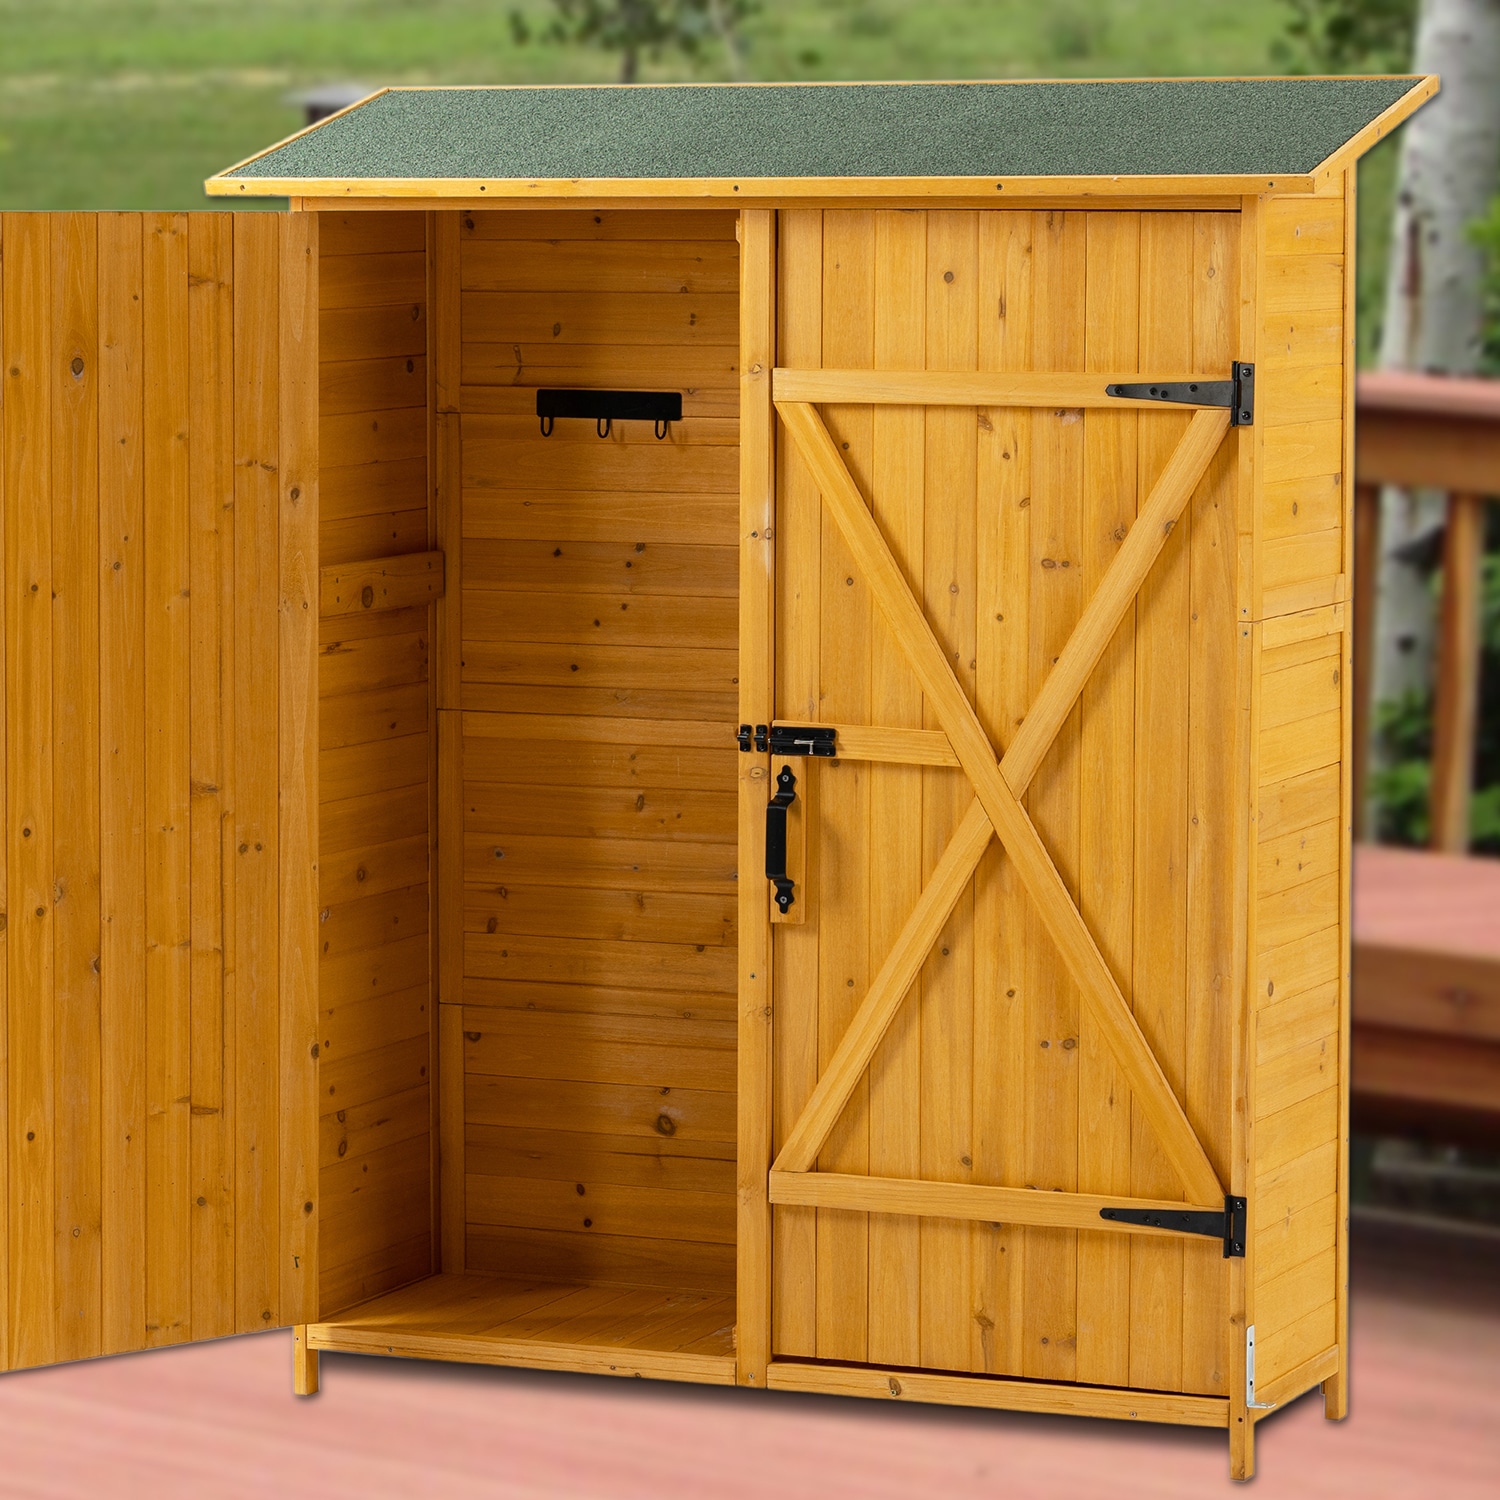 Outdoor Storage Shed,XL,H 54 In,W 60 In - Grainger